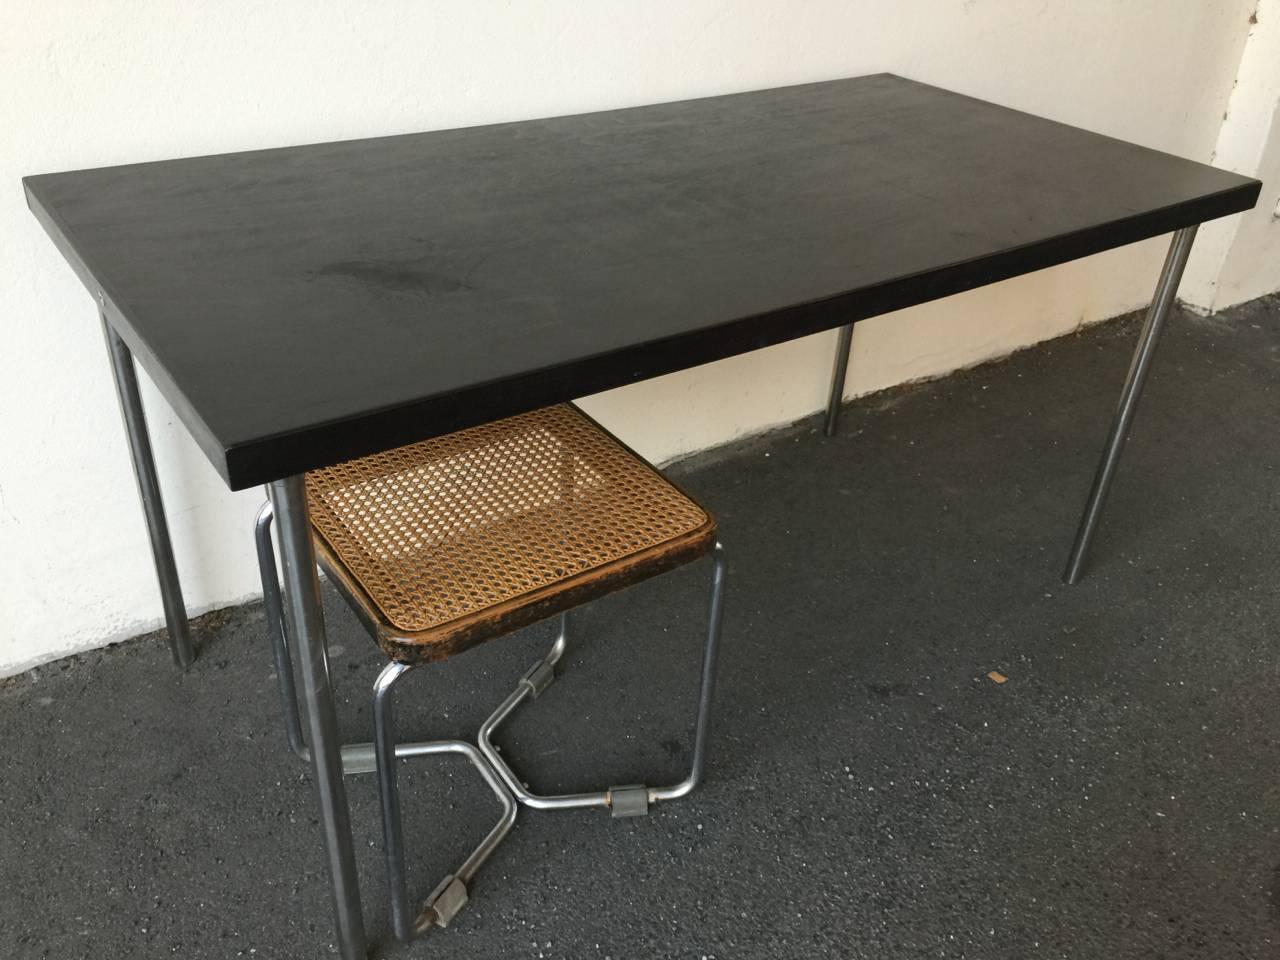 ebonized wood chromed metal. marked and in good vintage condition. matching stool also available.